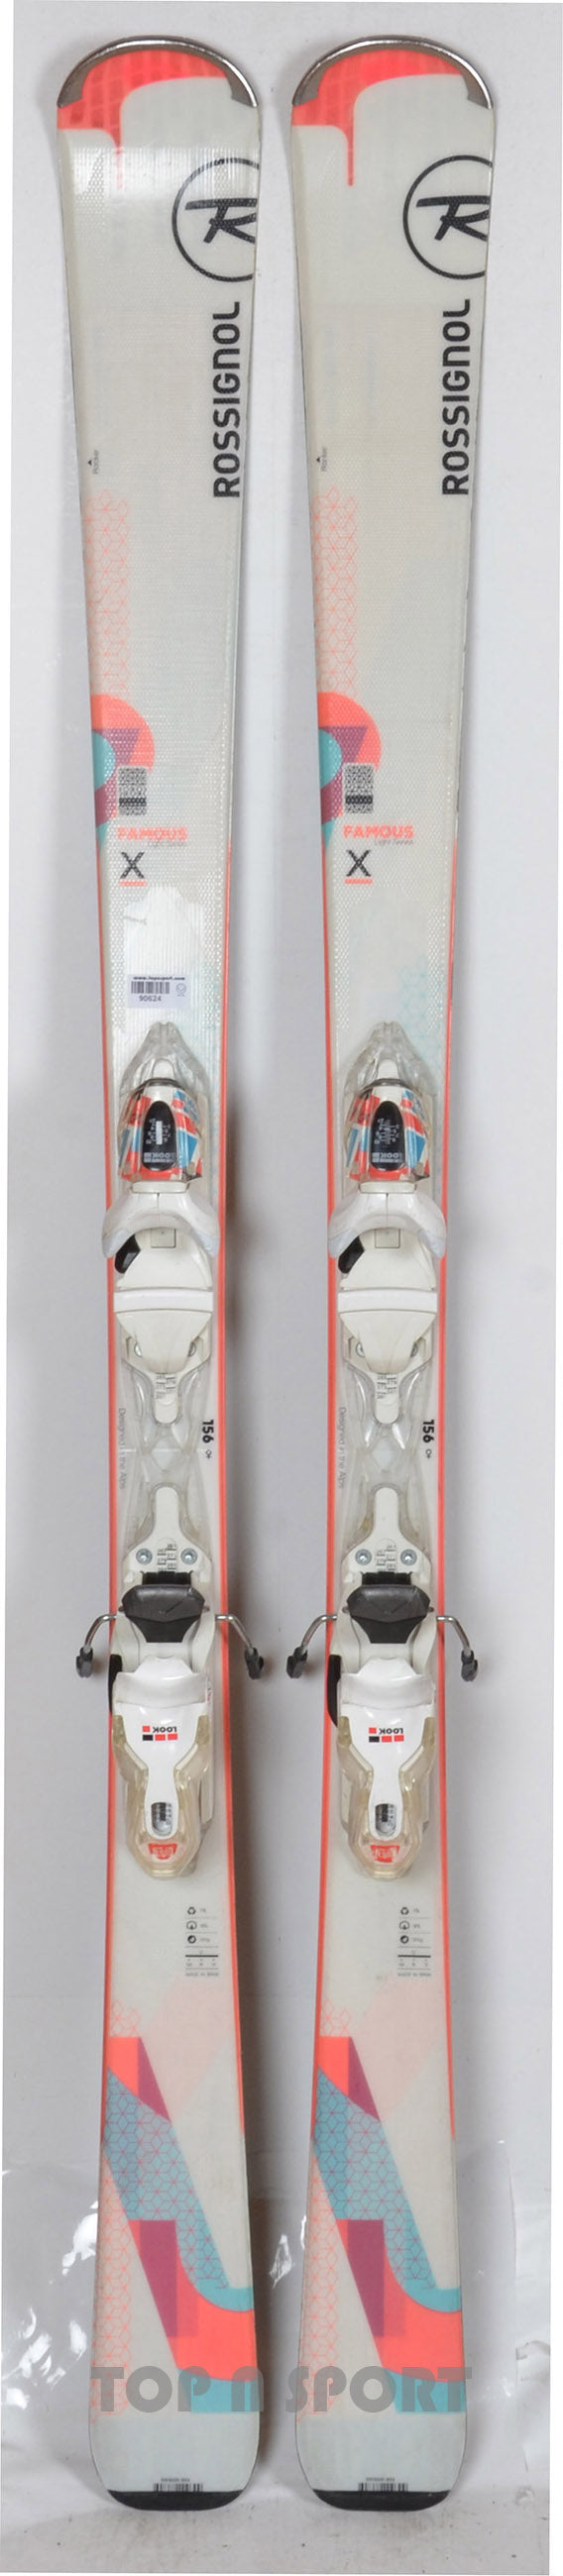 Rossignol FAMOUS 2 X - skis d'occasion Femme